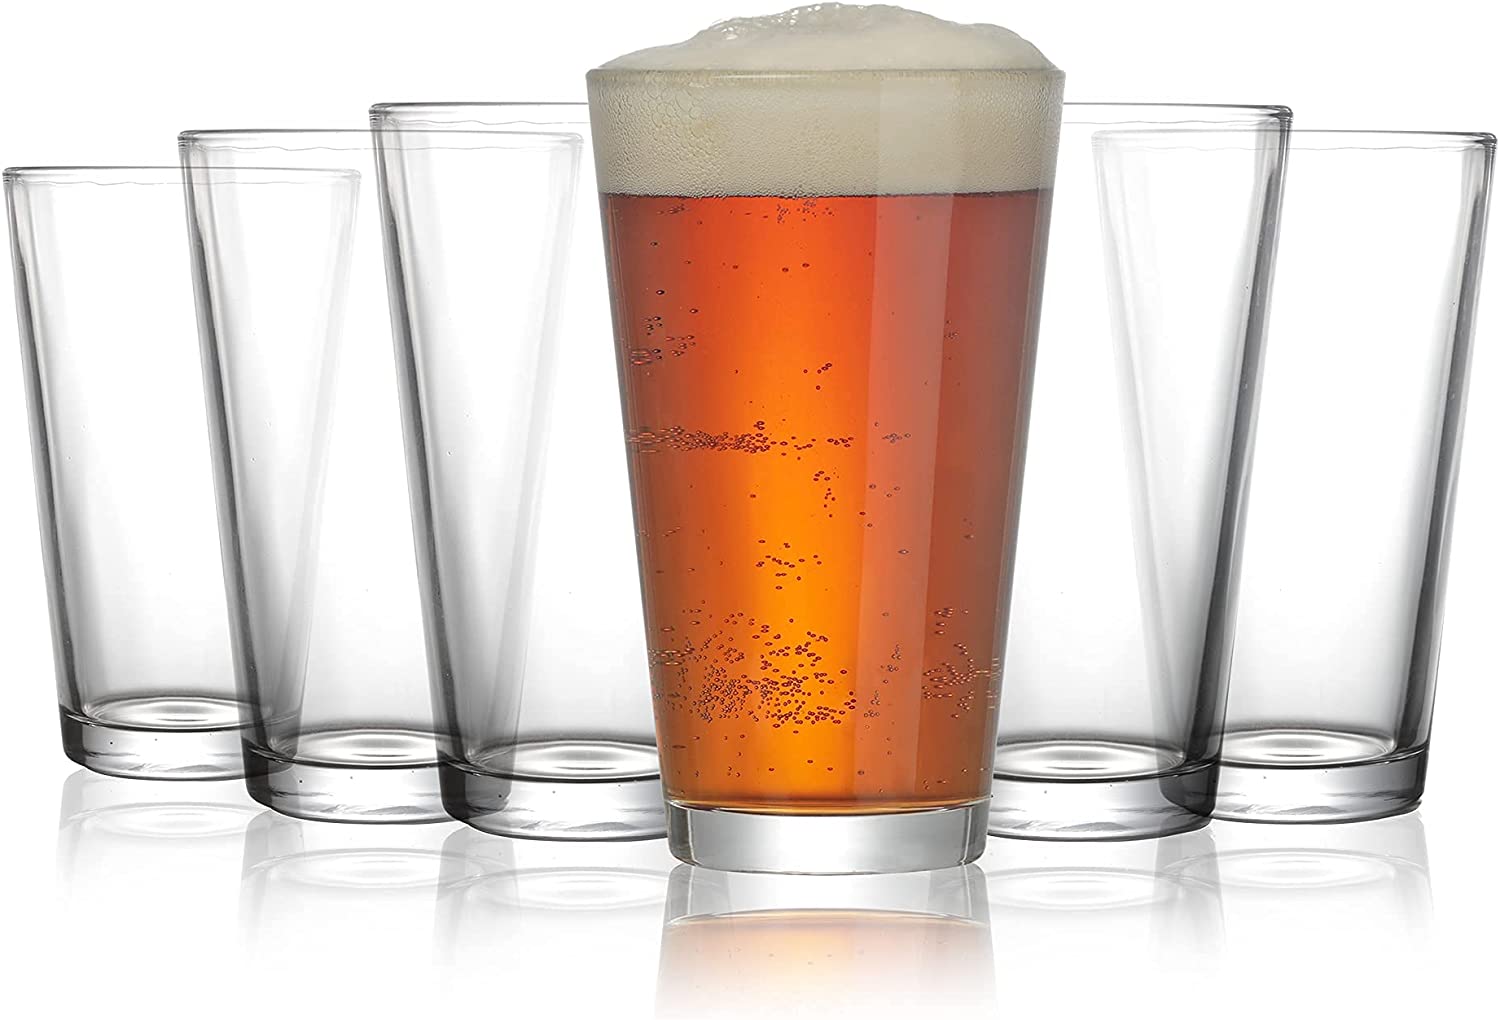 Beer Pint Glass - Classic Beer Glasses Pint, 16 Ounce Set of 6